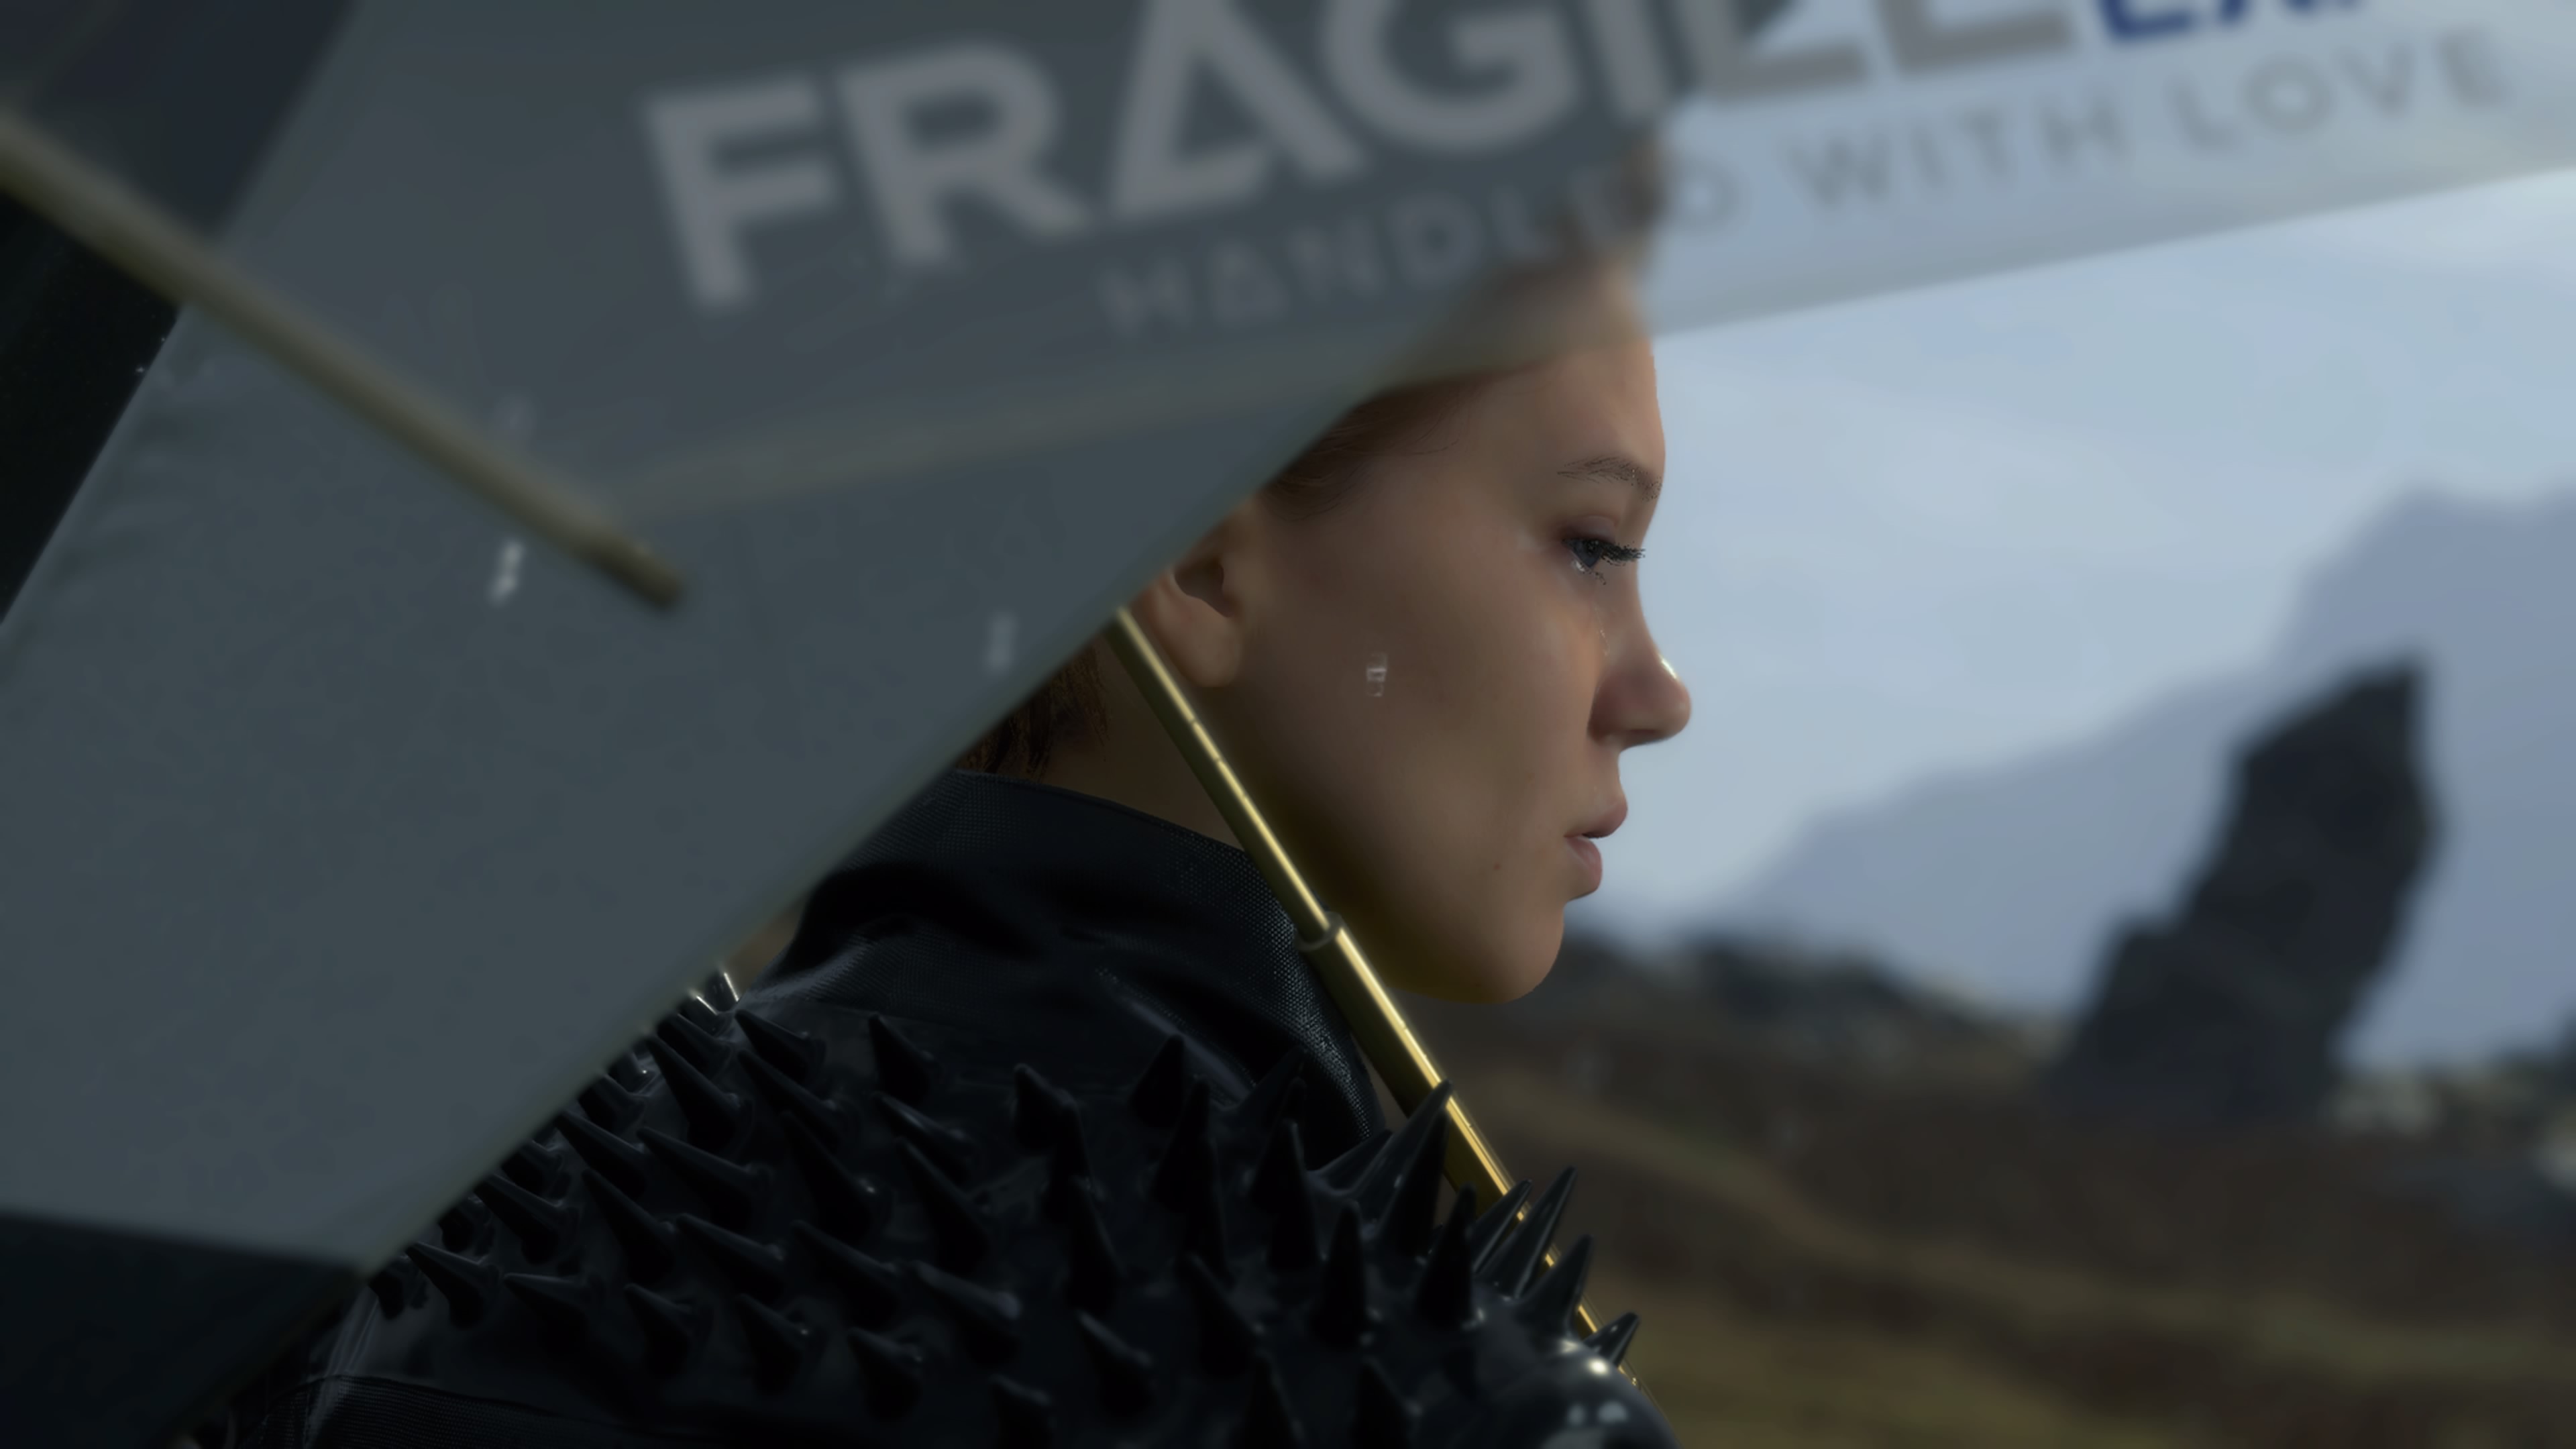 General 3840x2160 video games PlayStation 4 Léa Seydoux Kojima Productions screen shot Death Stranding Director's Cut Death Stranding Fragile (Death Stranding) actress video game characters